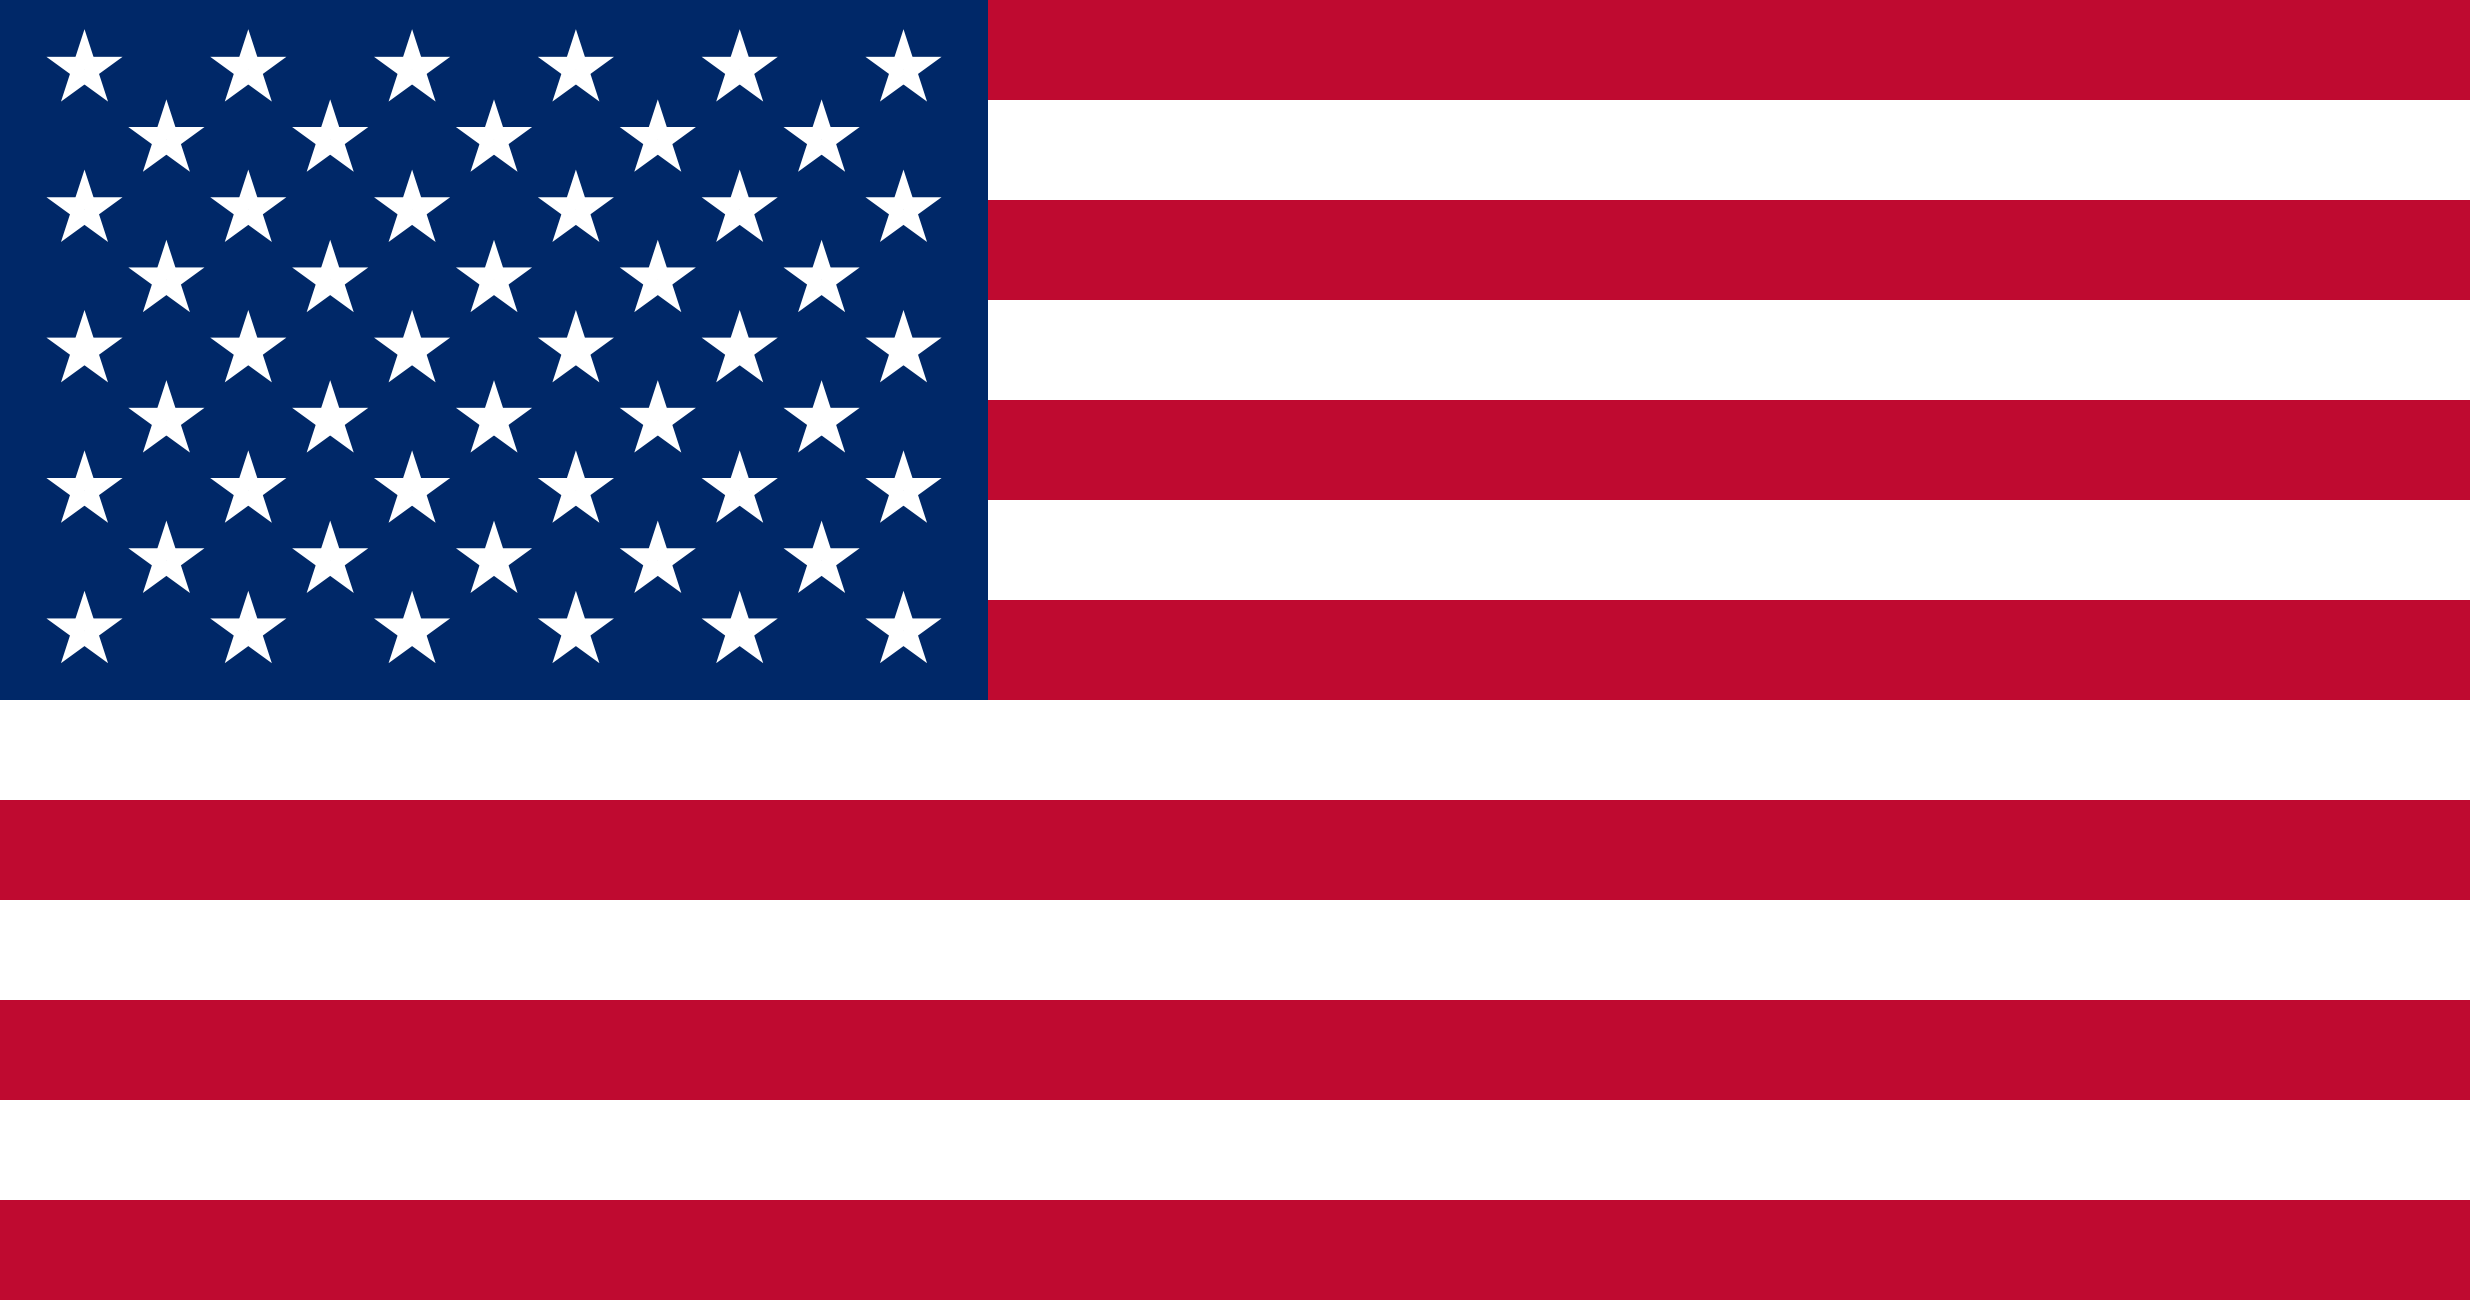 the image shows the american flag